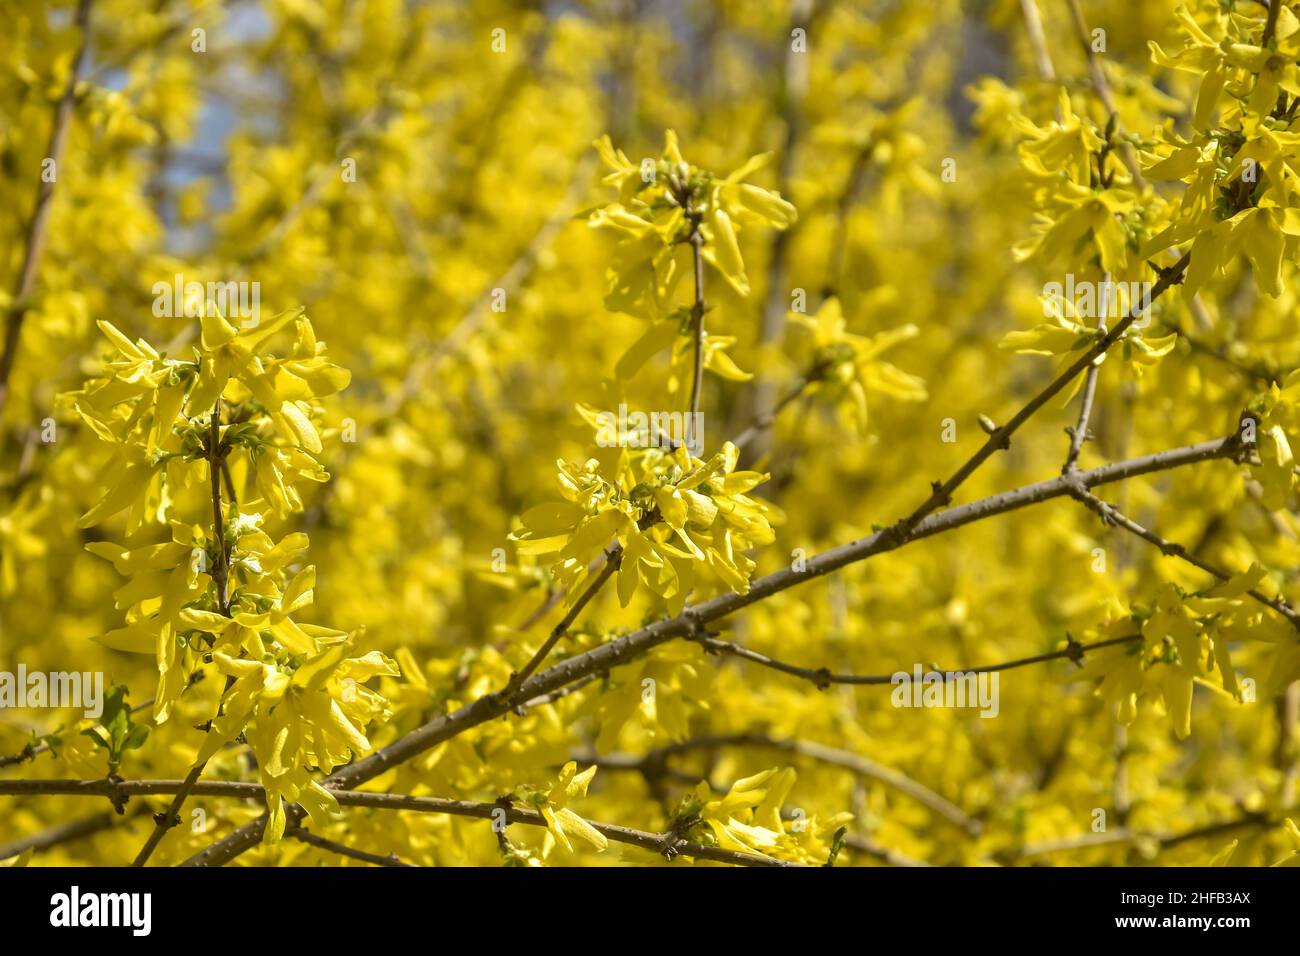 Bright yellow flowering of Forsythia- shrub from family of Olives (Oleaceae). Most forsythia species originate from China. Selective focus. Stock Photo